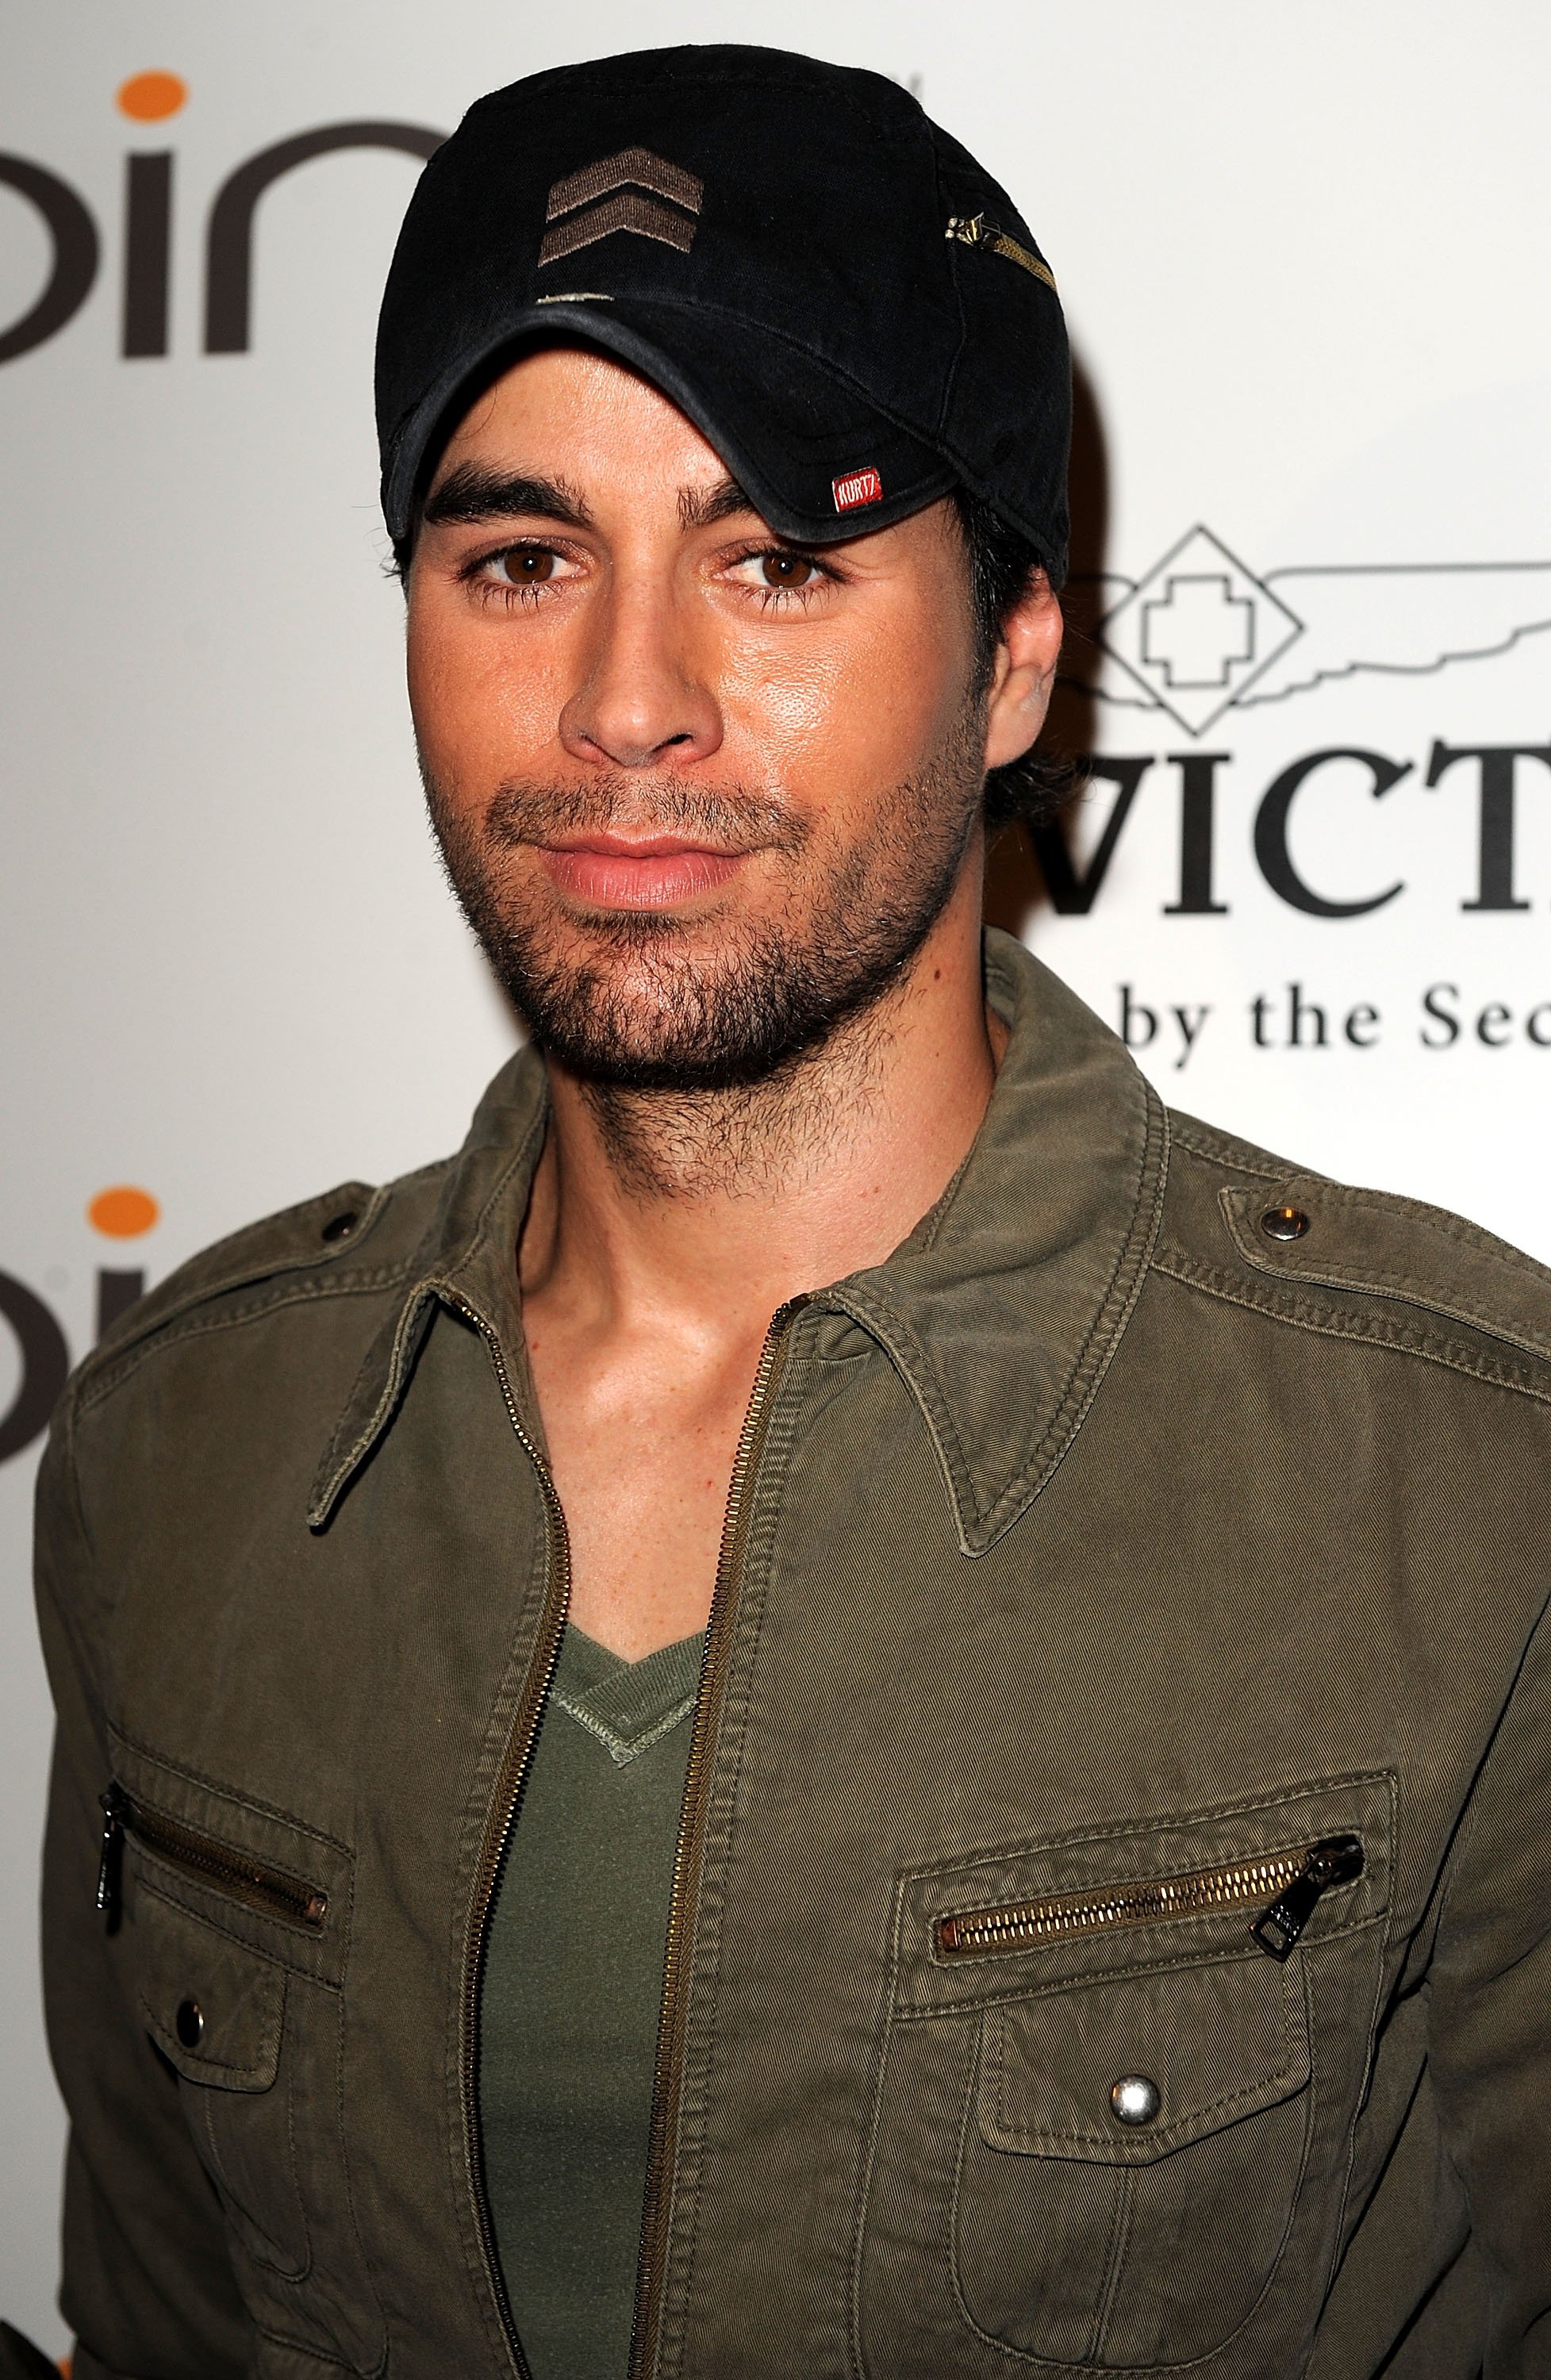 Enrique Iglesias attends Ocean Drive Magazine Eighteenth Anniversary event at JW Marriott on March 9, 2011 in Miami, Florida | Photo: Getty Images